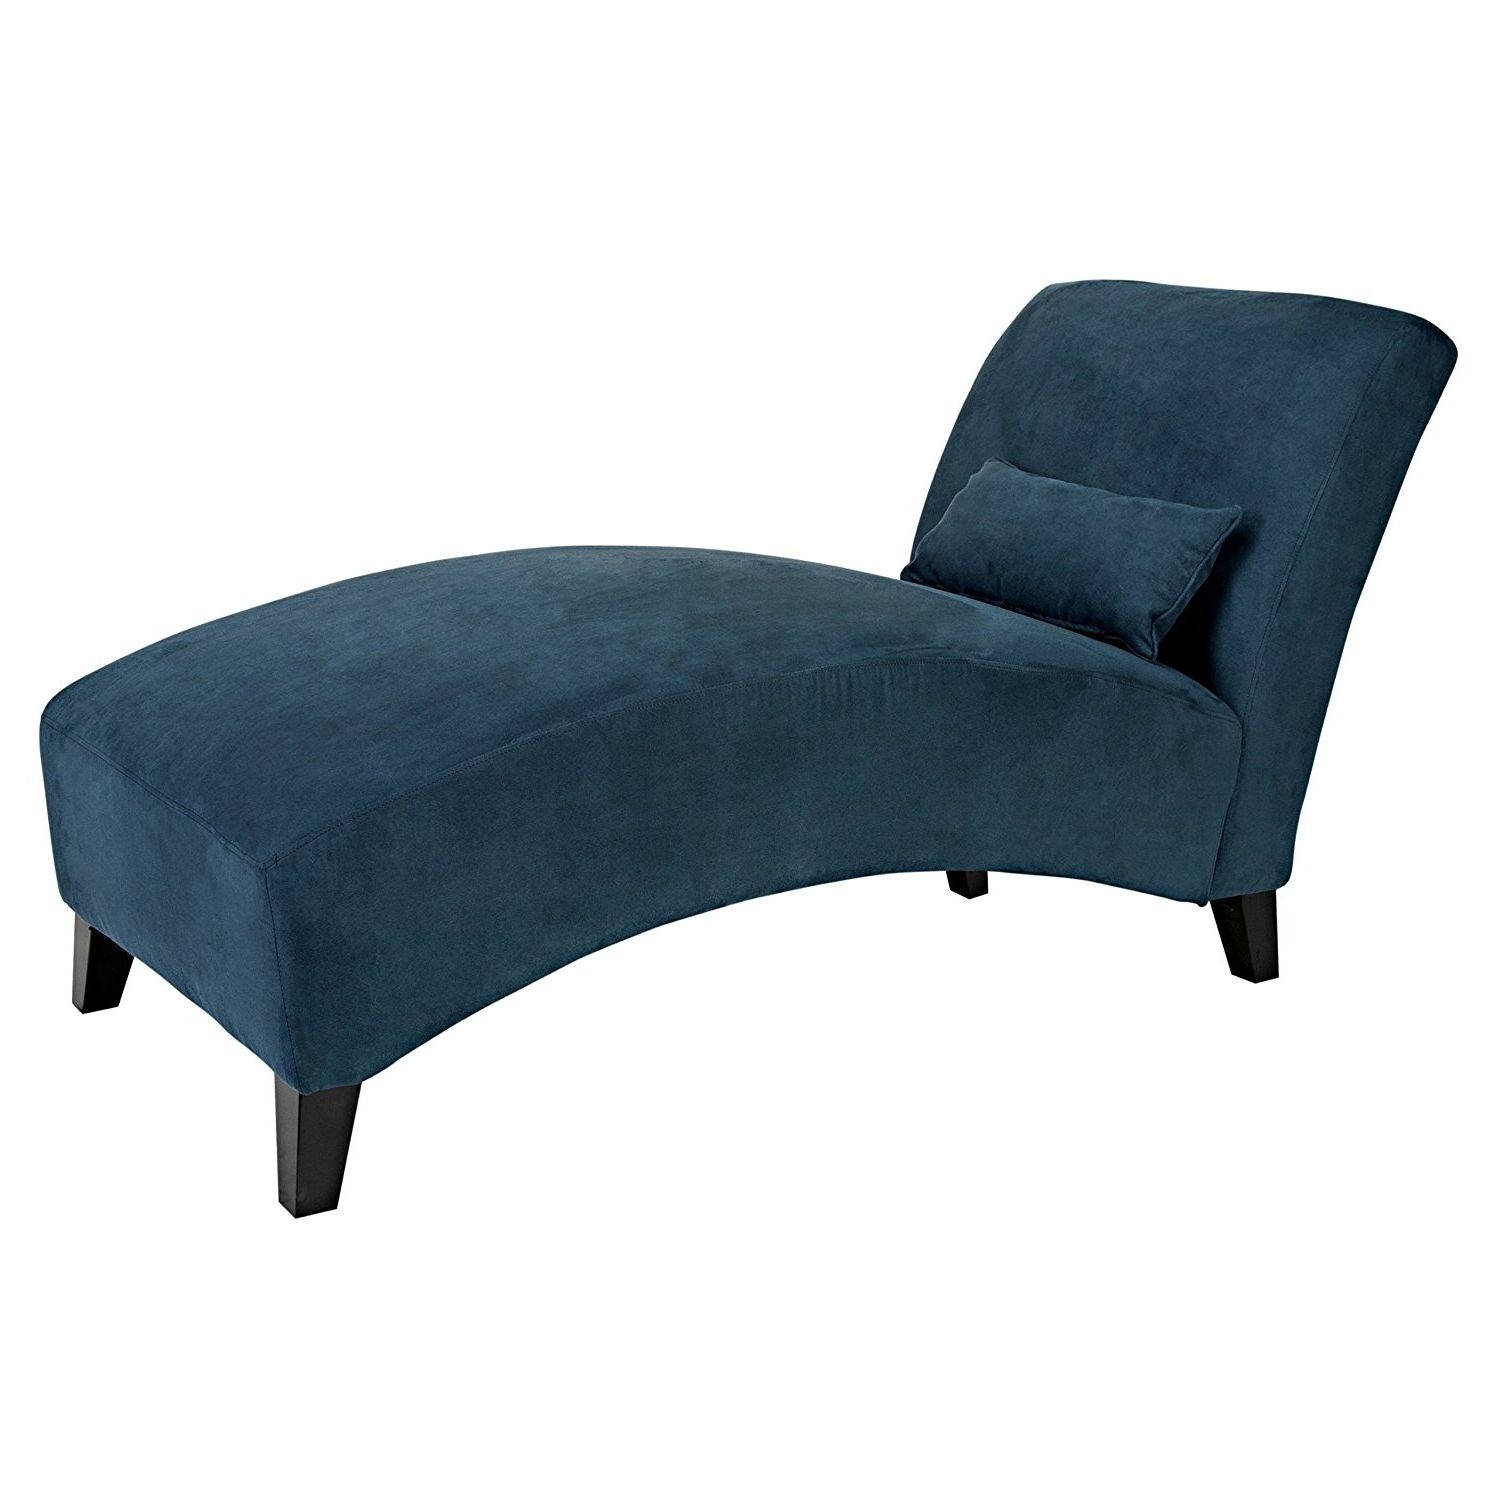 2018 Amazon: Handy Living Cara Chaise In Turquoise Velvet: Kitchen In Turquoise Chaise Lounges (View 3 of 15)